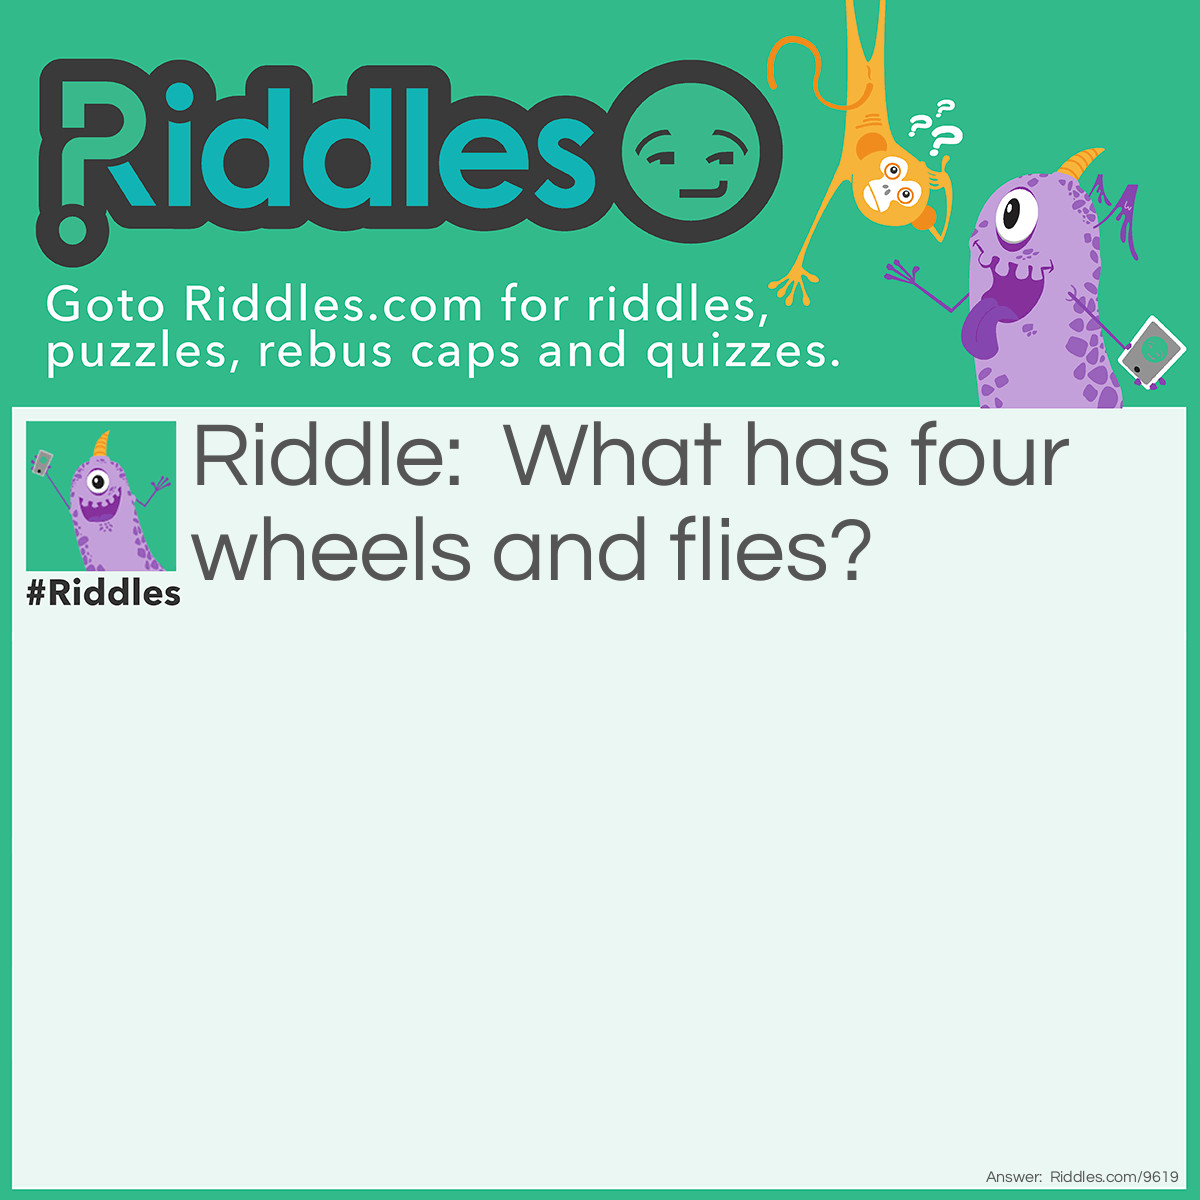 Riddle: What has four wheels and flies? Answer: A Garbage Truck, Listen the Question carefully. It Has Four Wheels And Flies, means mosquito's understood